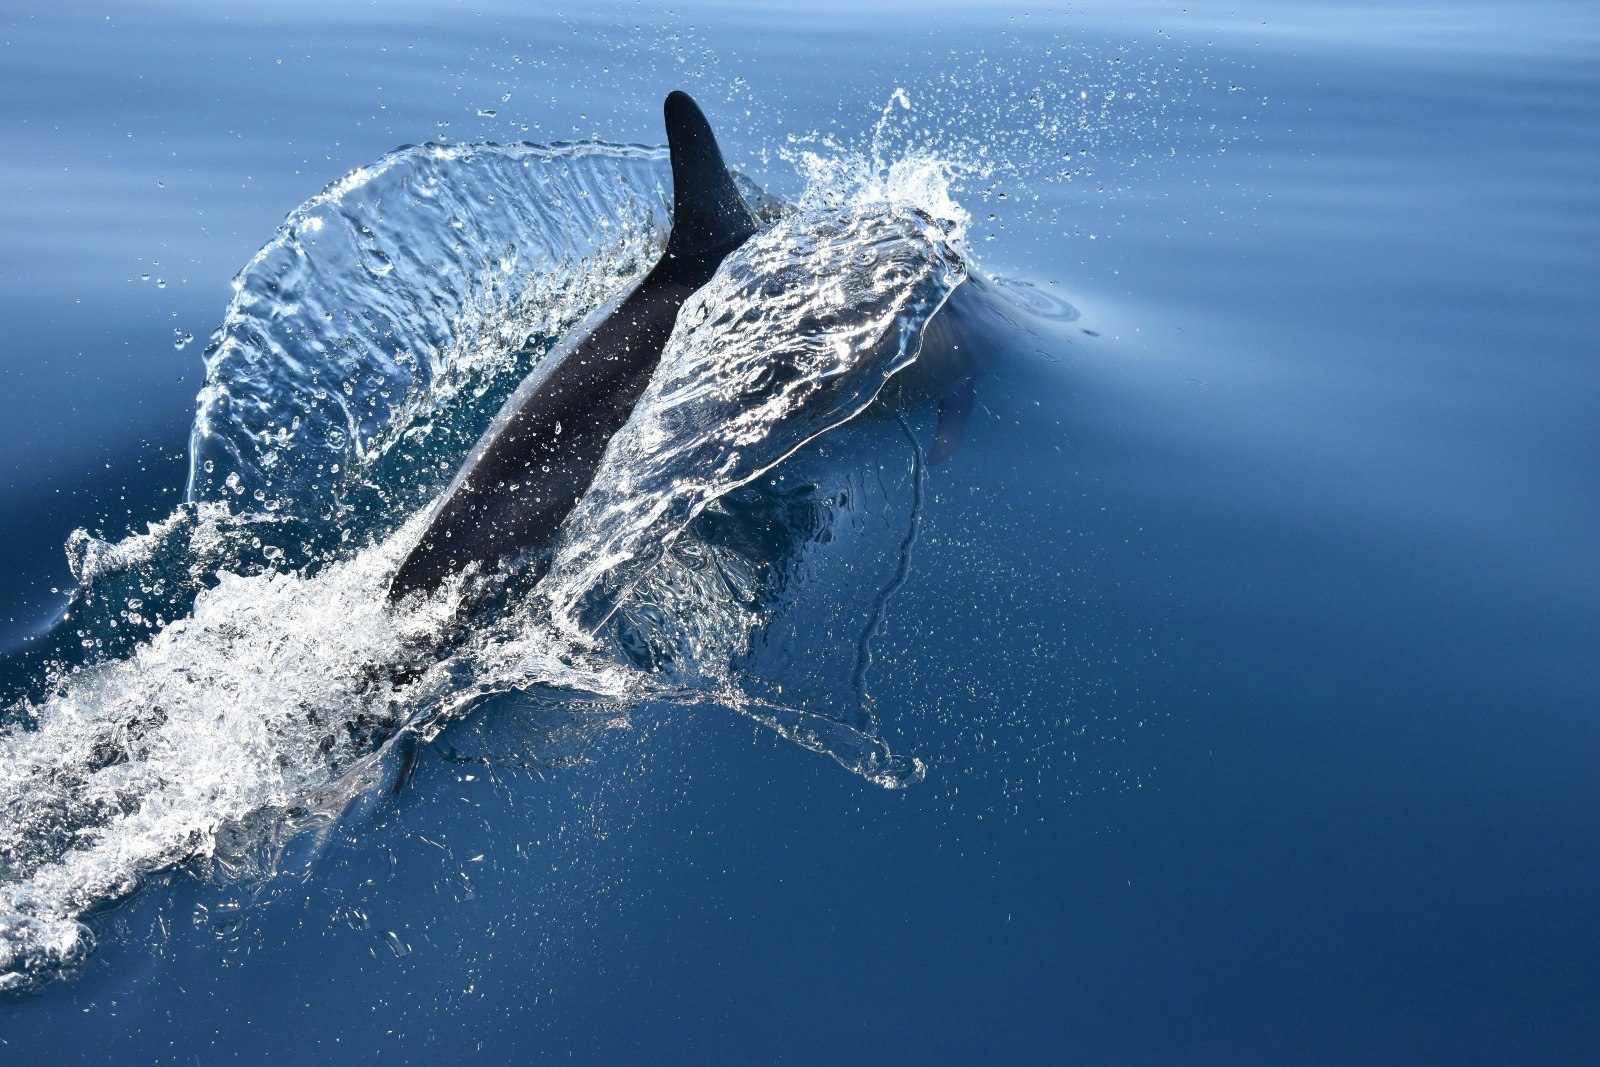 A dolphin's fin breaches the water